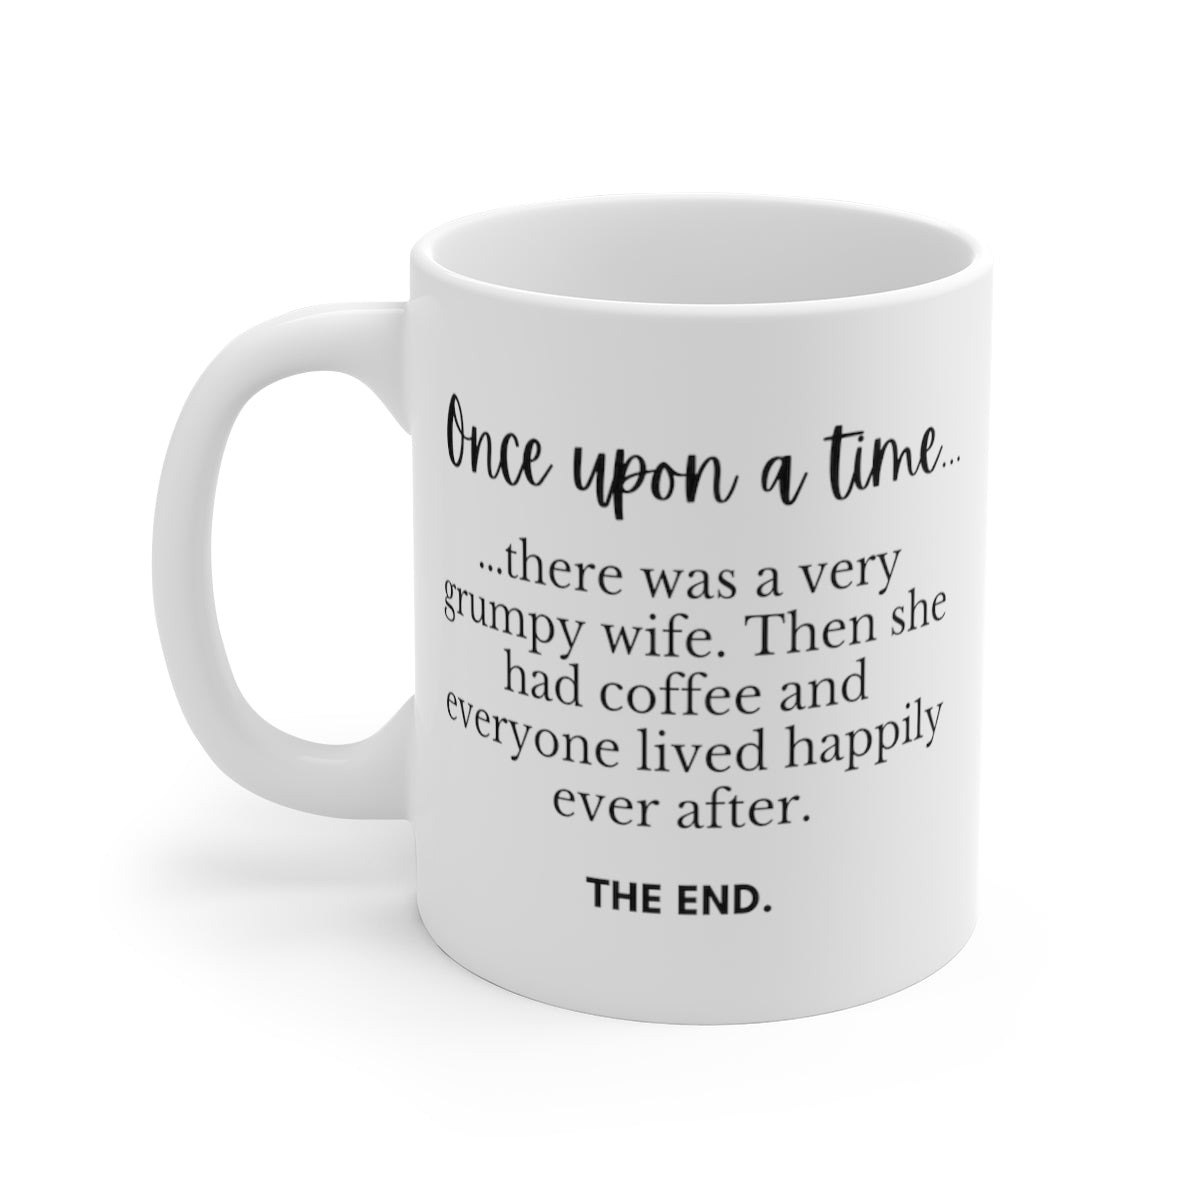 Once Upon A Time There Was A Very Grumpy Wife. Then She Had Coffee... | Funny Mug for Coffee Lovers | Mug 11oz